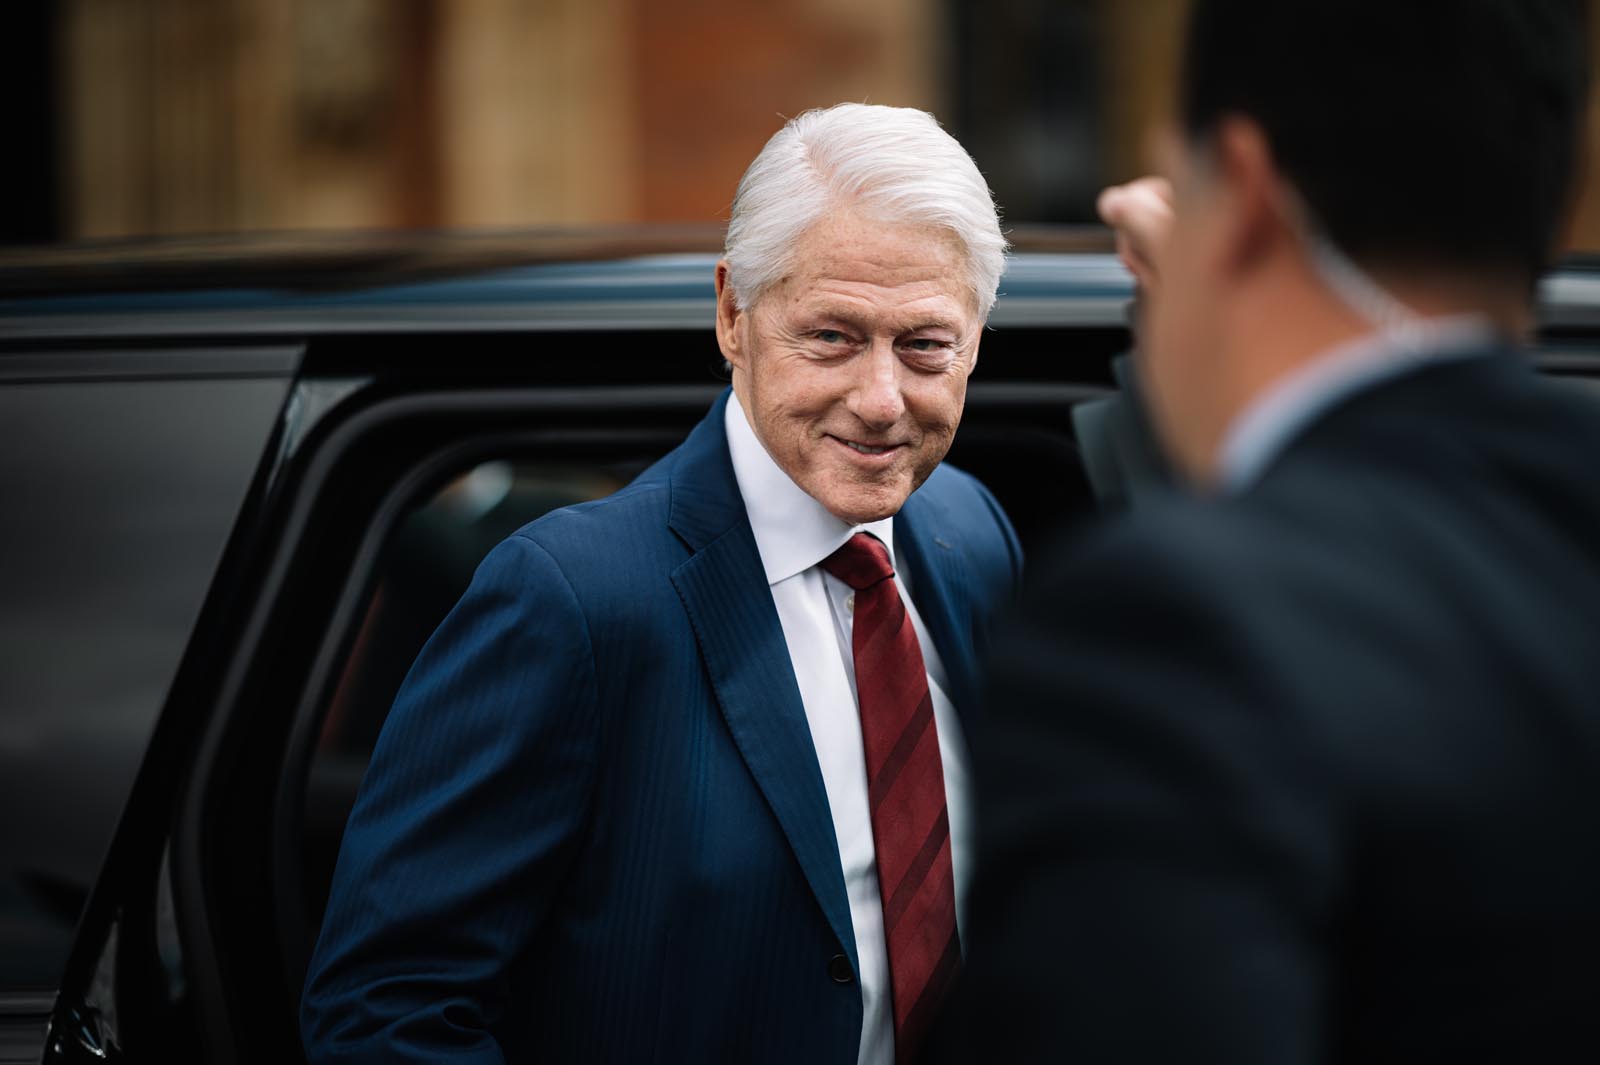 William J Clinton, Former President of the United States and Chair of the Clinton Foundation